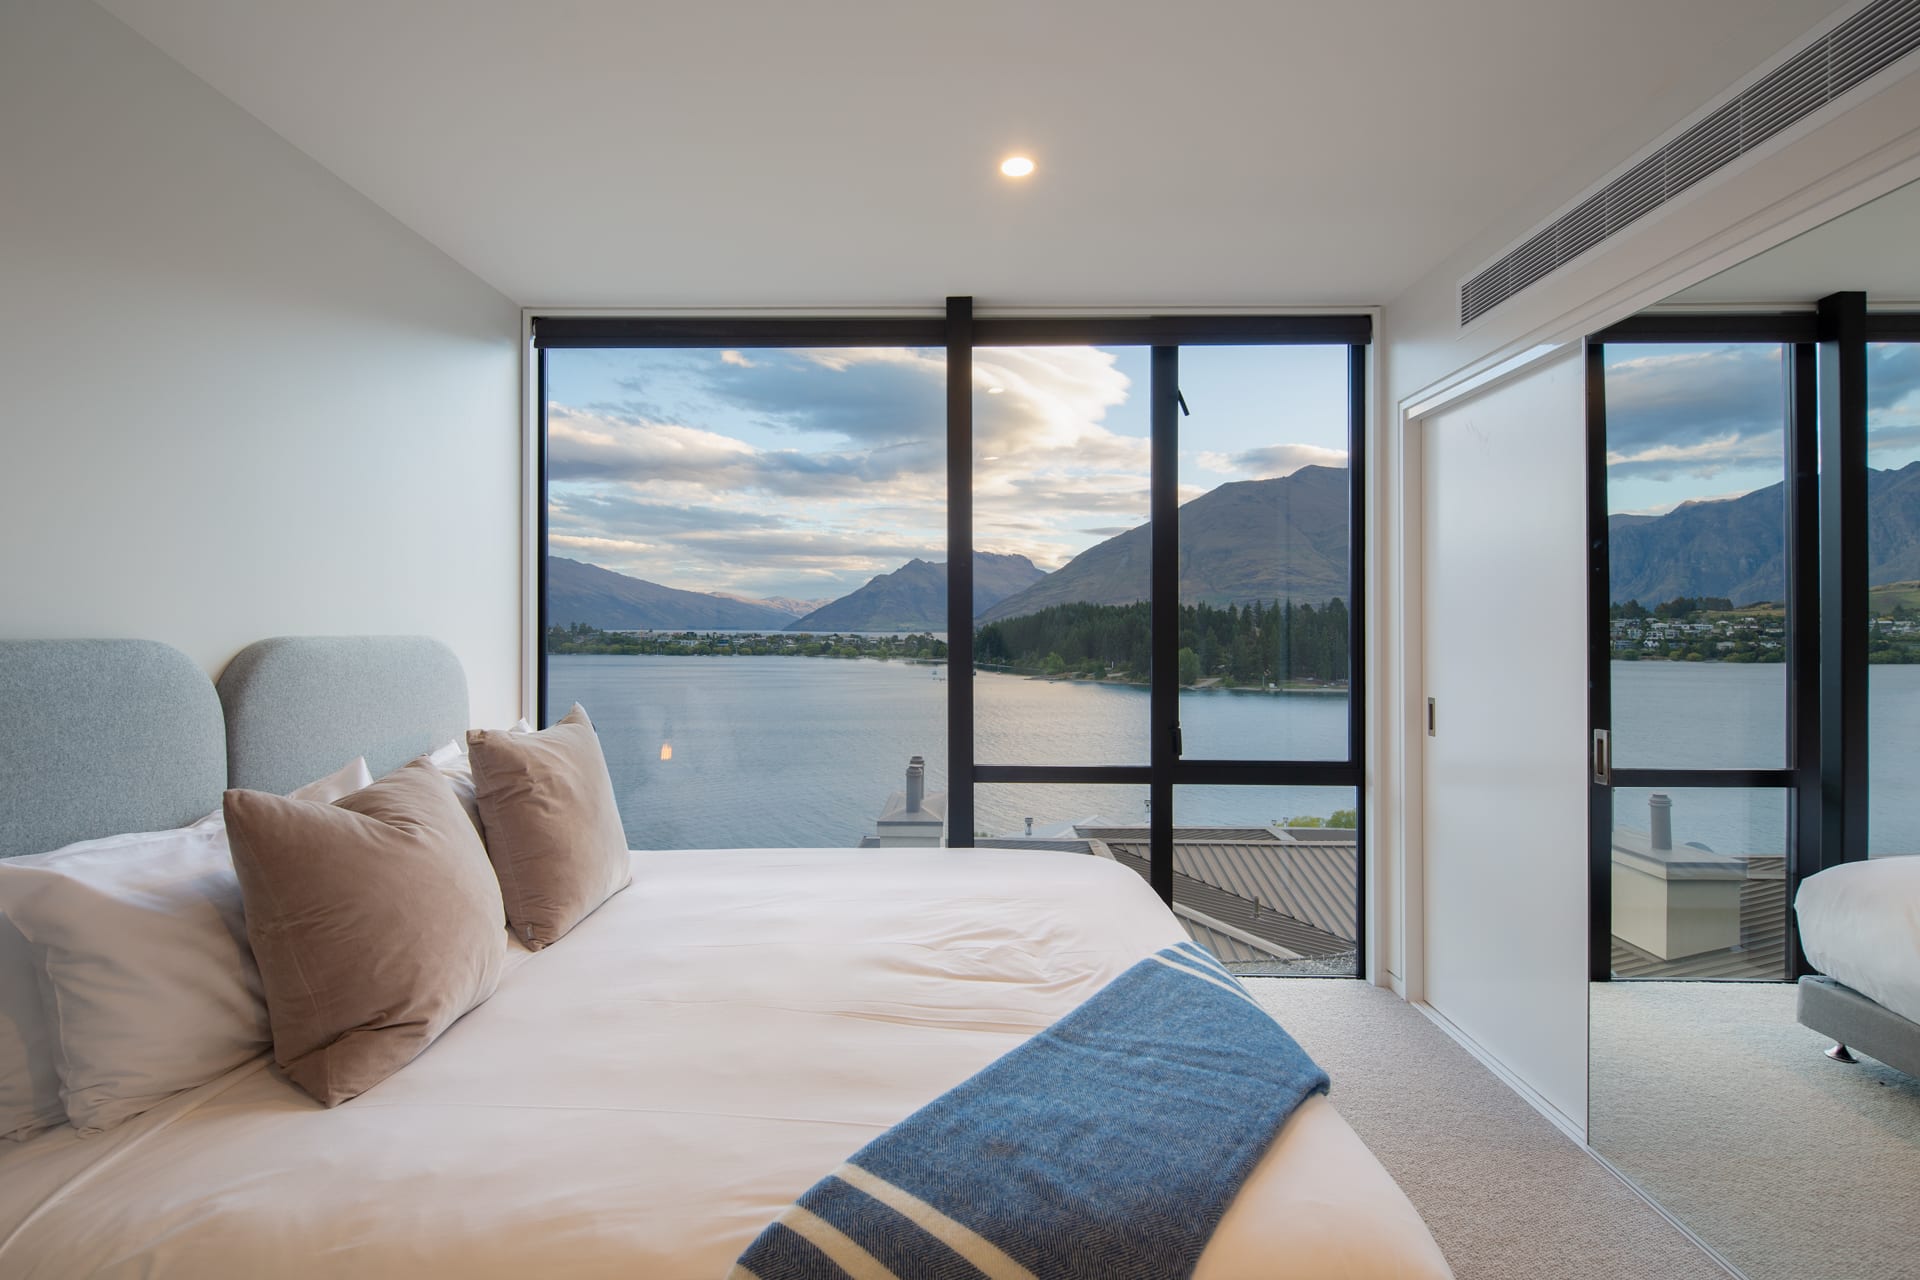 Bedroom 1 with outstanding views